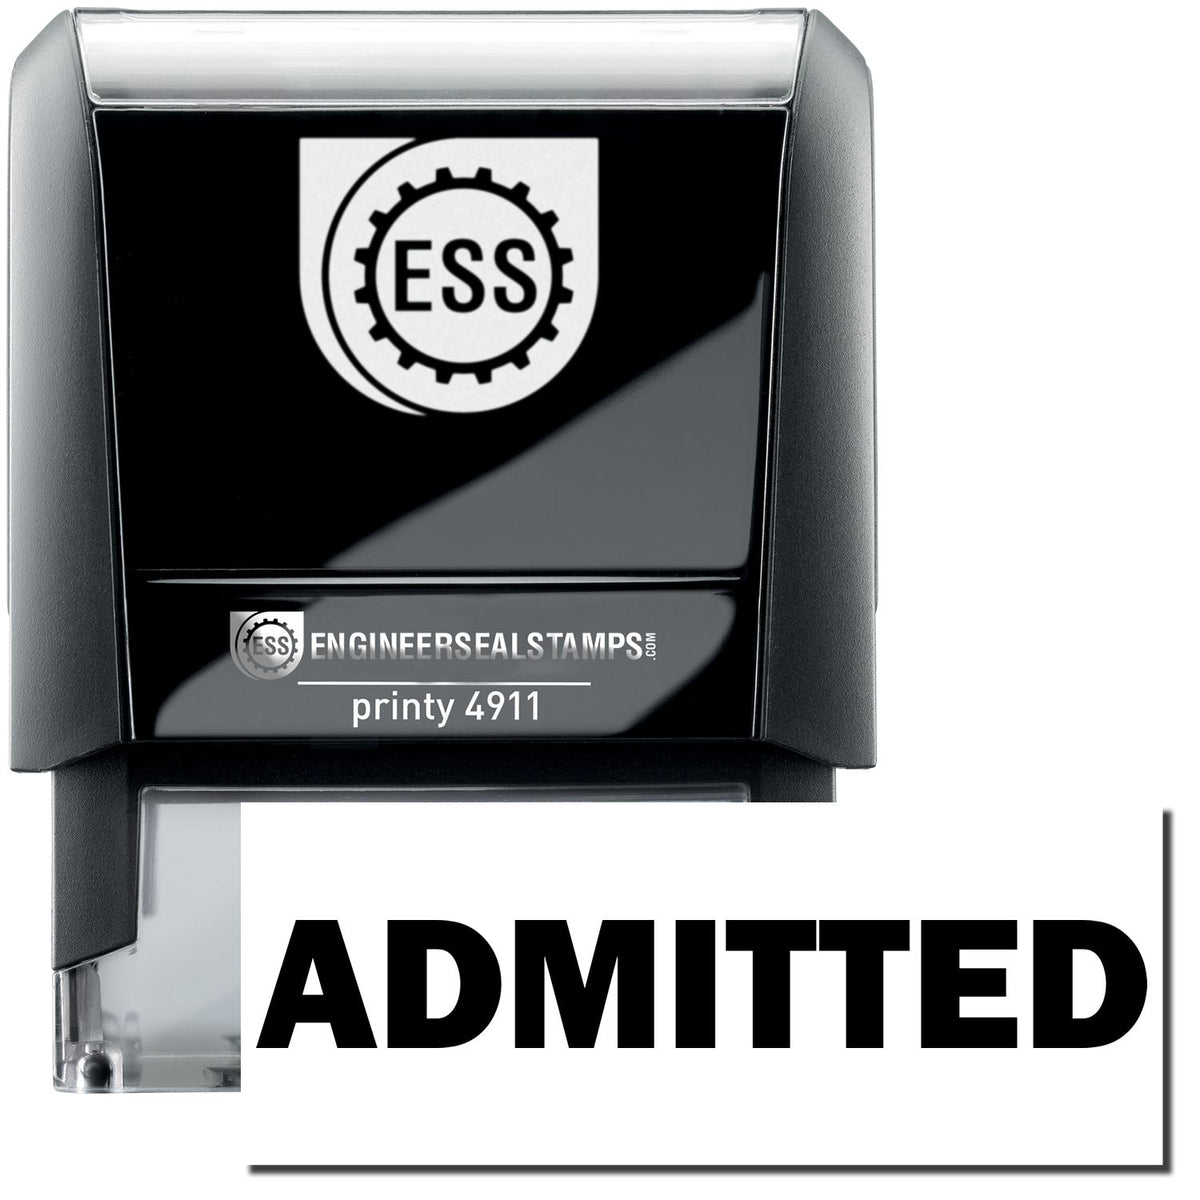 A self-inking stamp with a stamped image showing how the text &quot;ADMITTED&quot; is displayed after stamping.